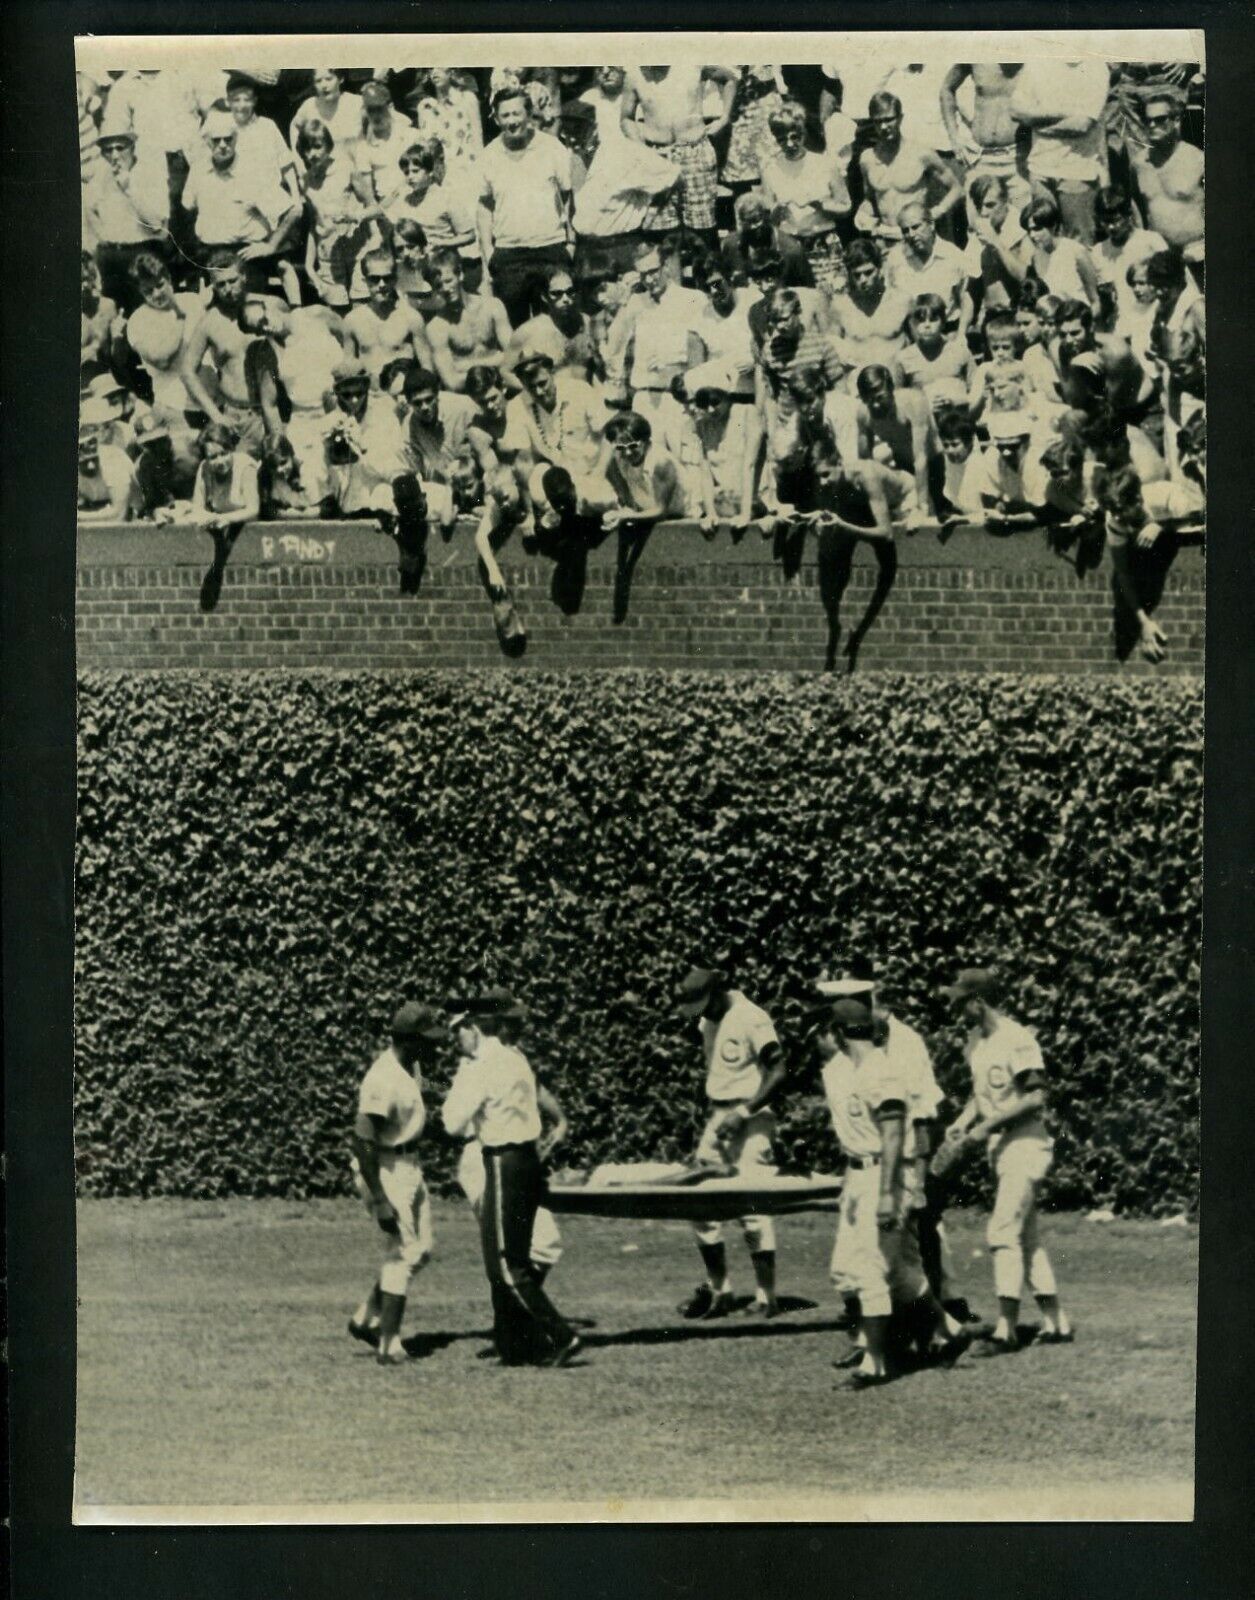 Adolfo Phillips carried off Wrigley Field 1968 Type 1 Press Photo Poster painting Chicago Cubs